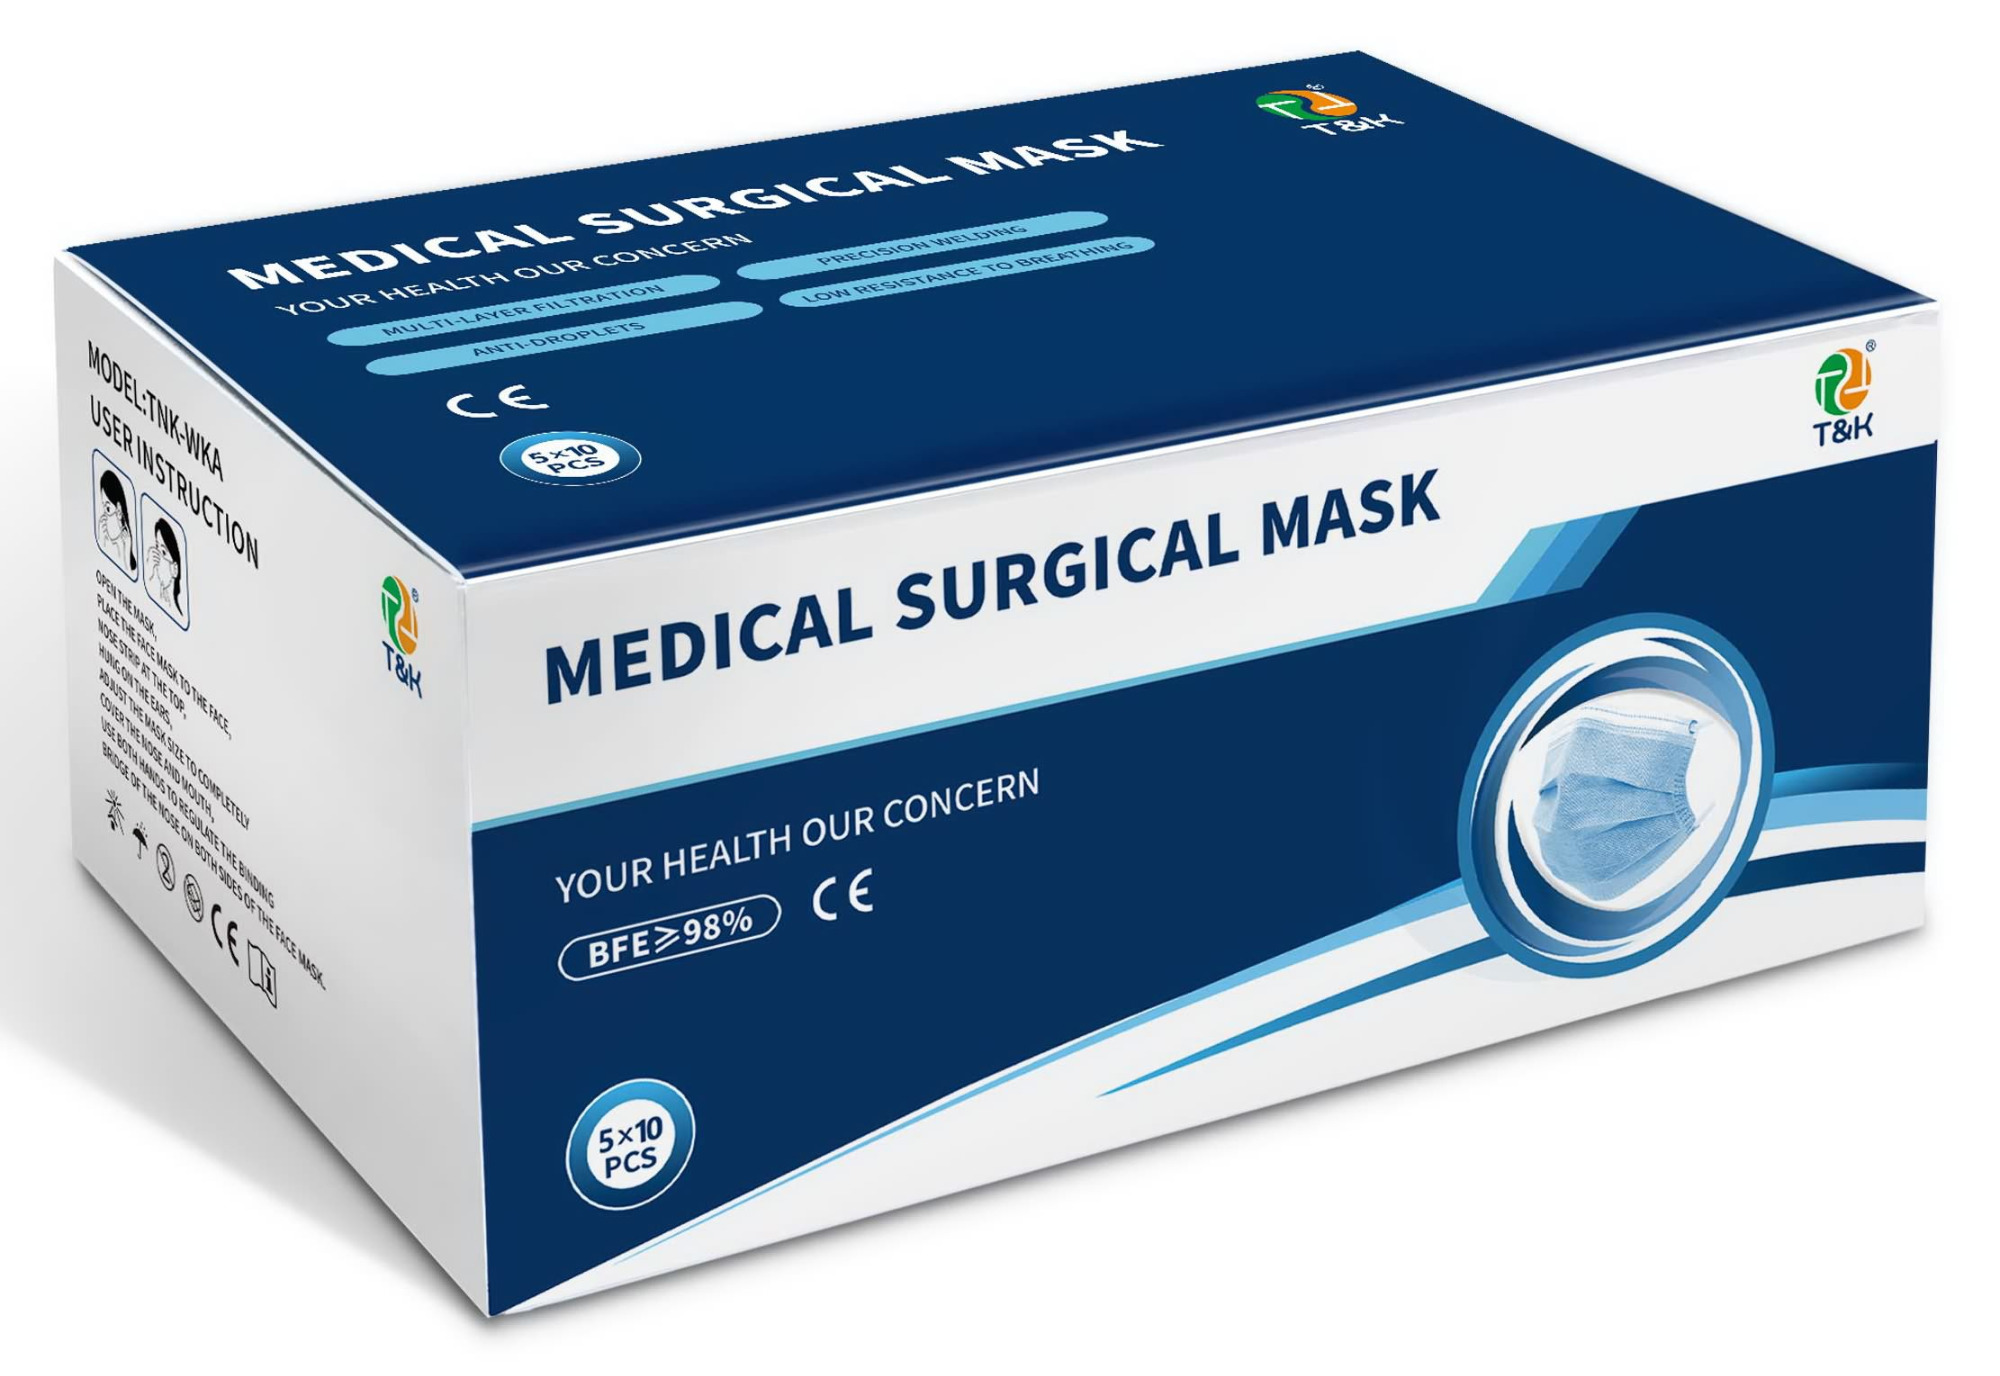 3 Ply Type IIR Medical Surgical Face Mask (Ear-Loop)